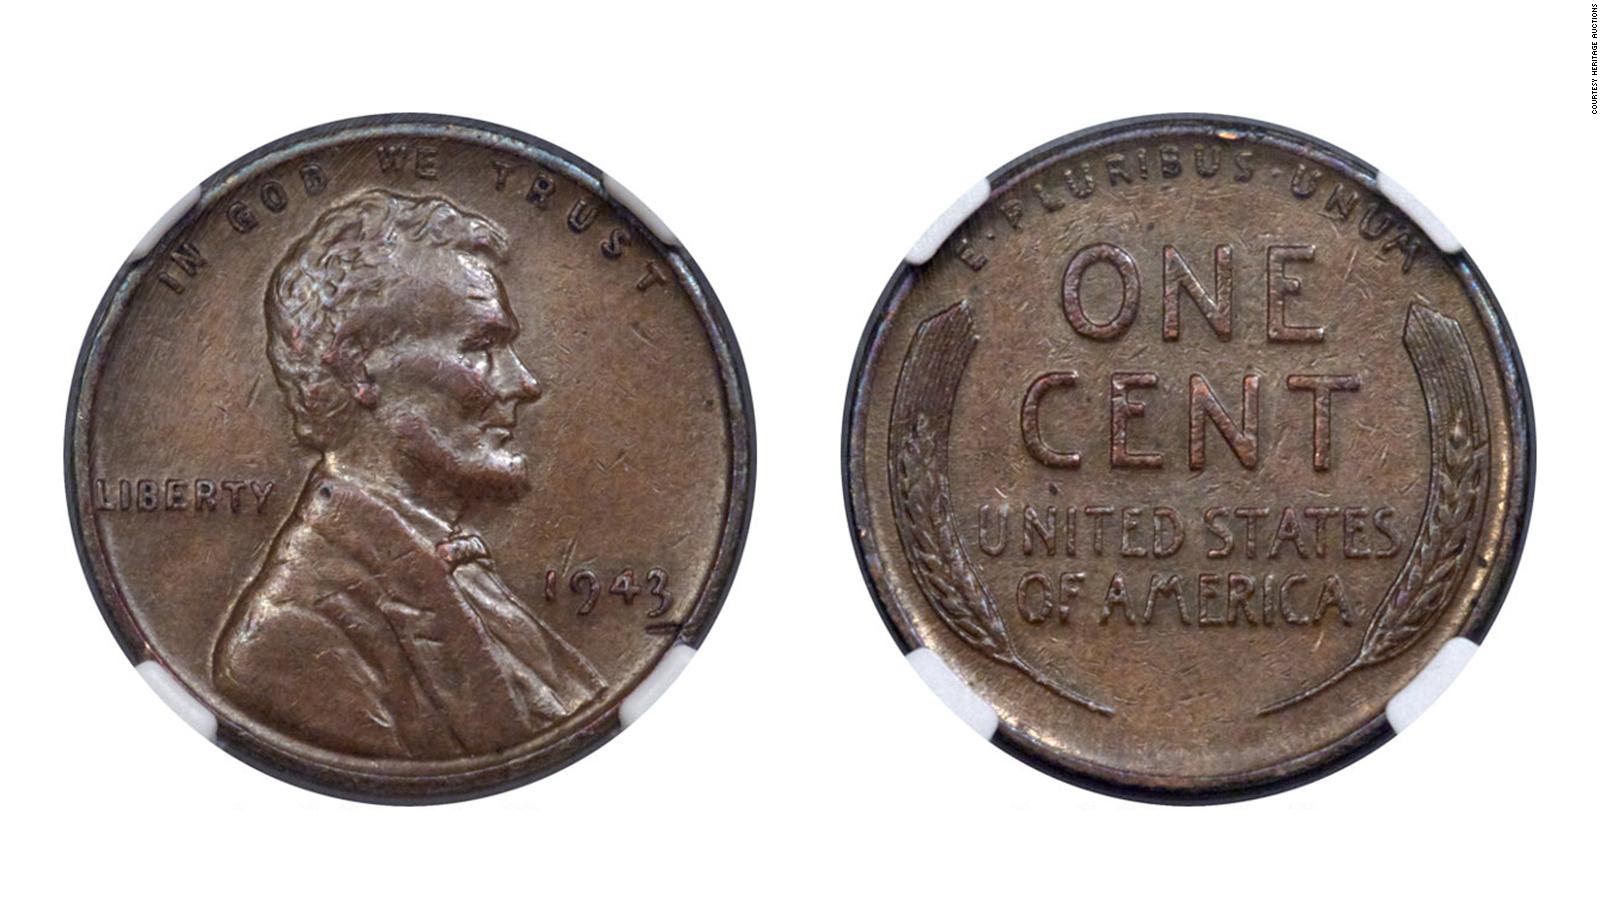 Rare 1943 copper coin fetches a penny in auction - CNN Style